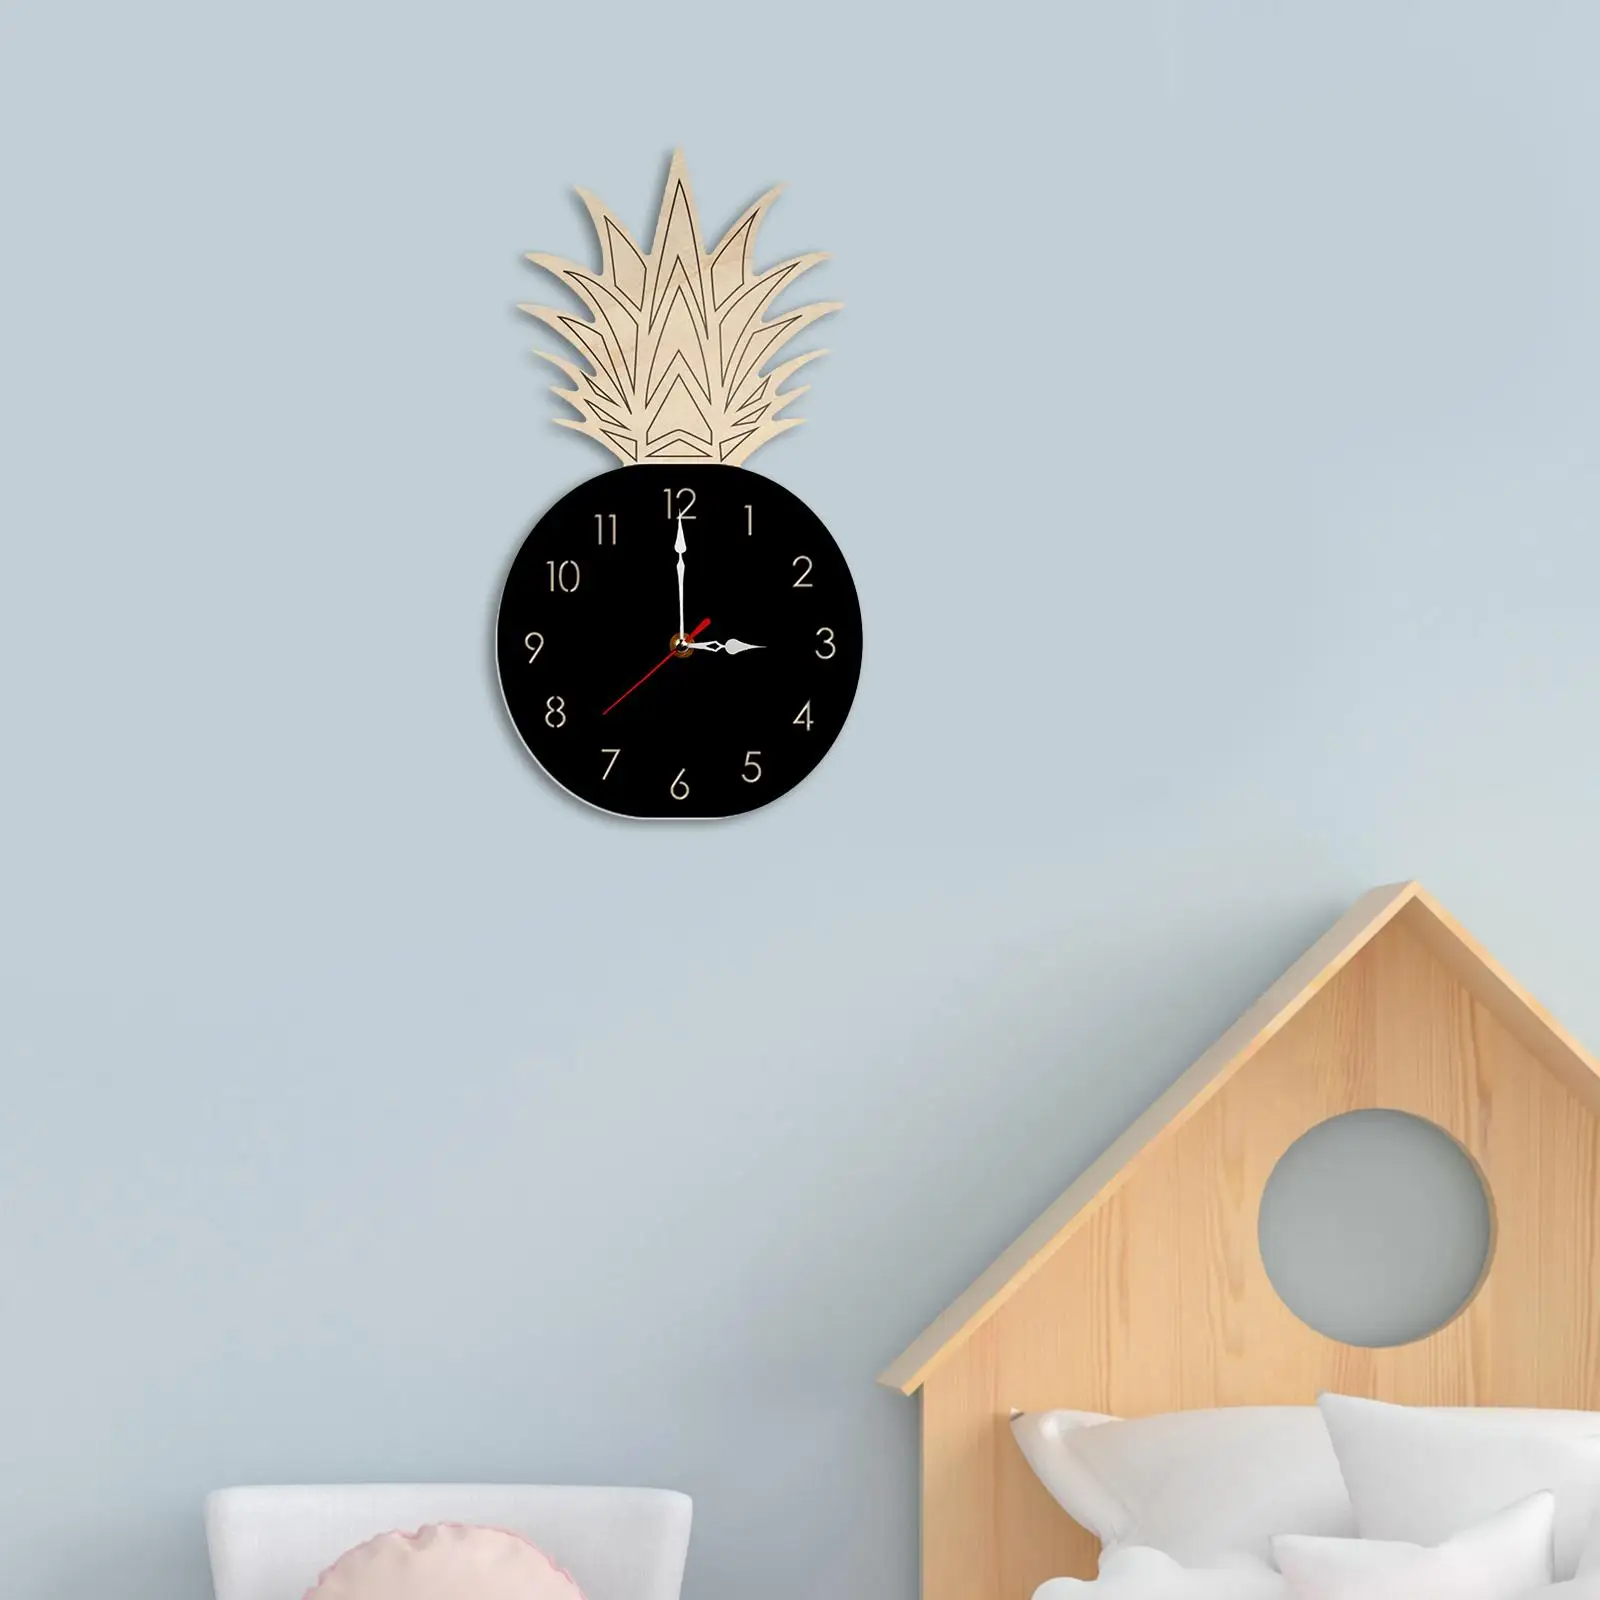 Pineapple Wall Clock Silent Nordic Style Modern Cartoon Wall Hanging Decor for Kids Room Kitchen Bedroom Living Room Home Decor